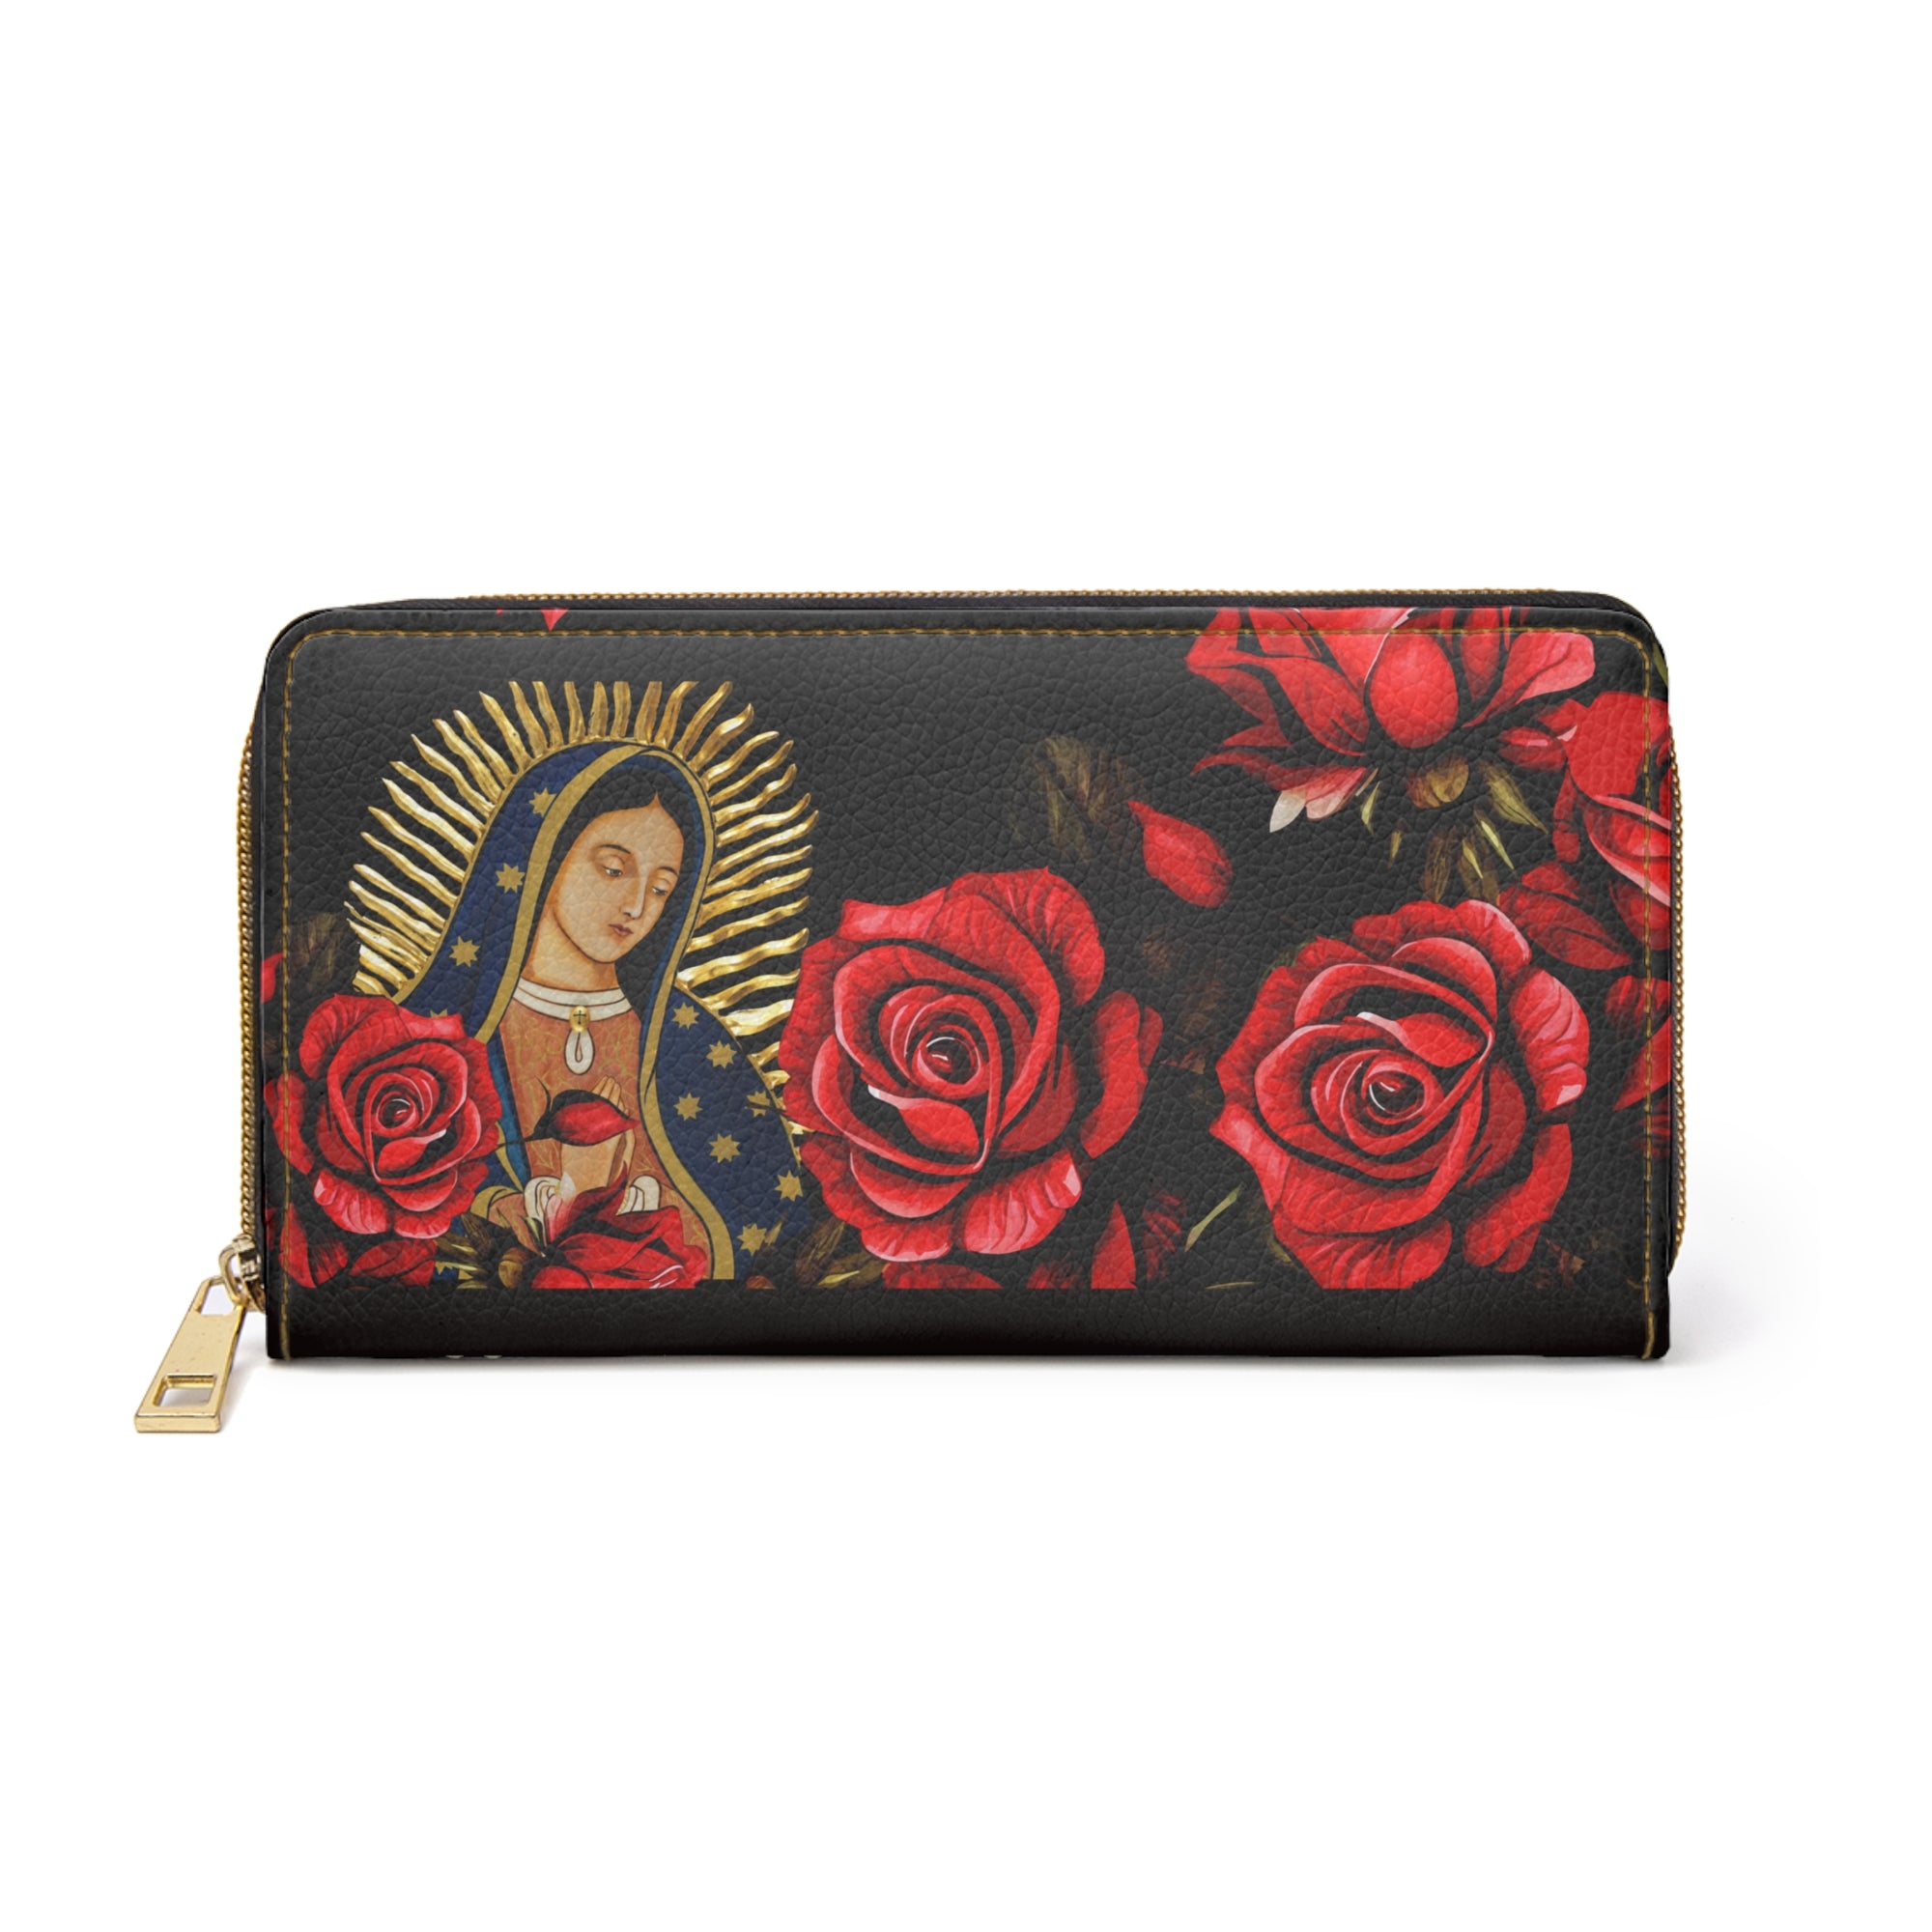 Our Lady of Guadalupe Zipper Wallet (Vegan Leather)